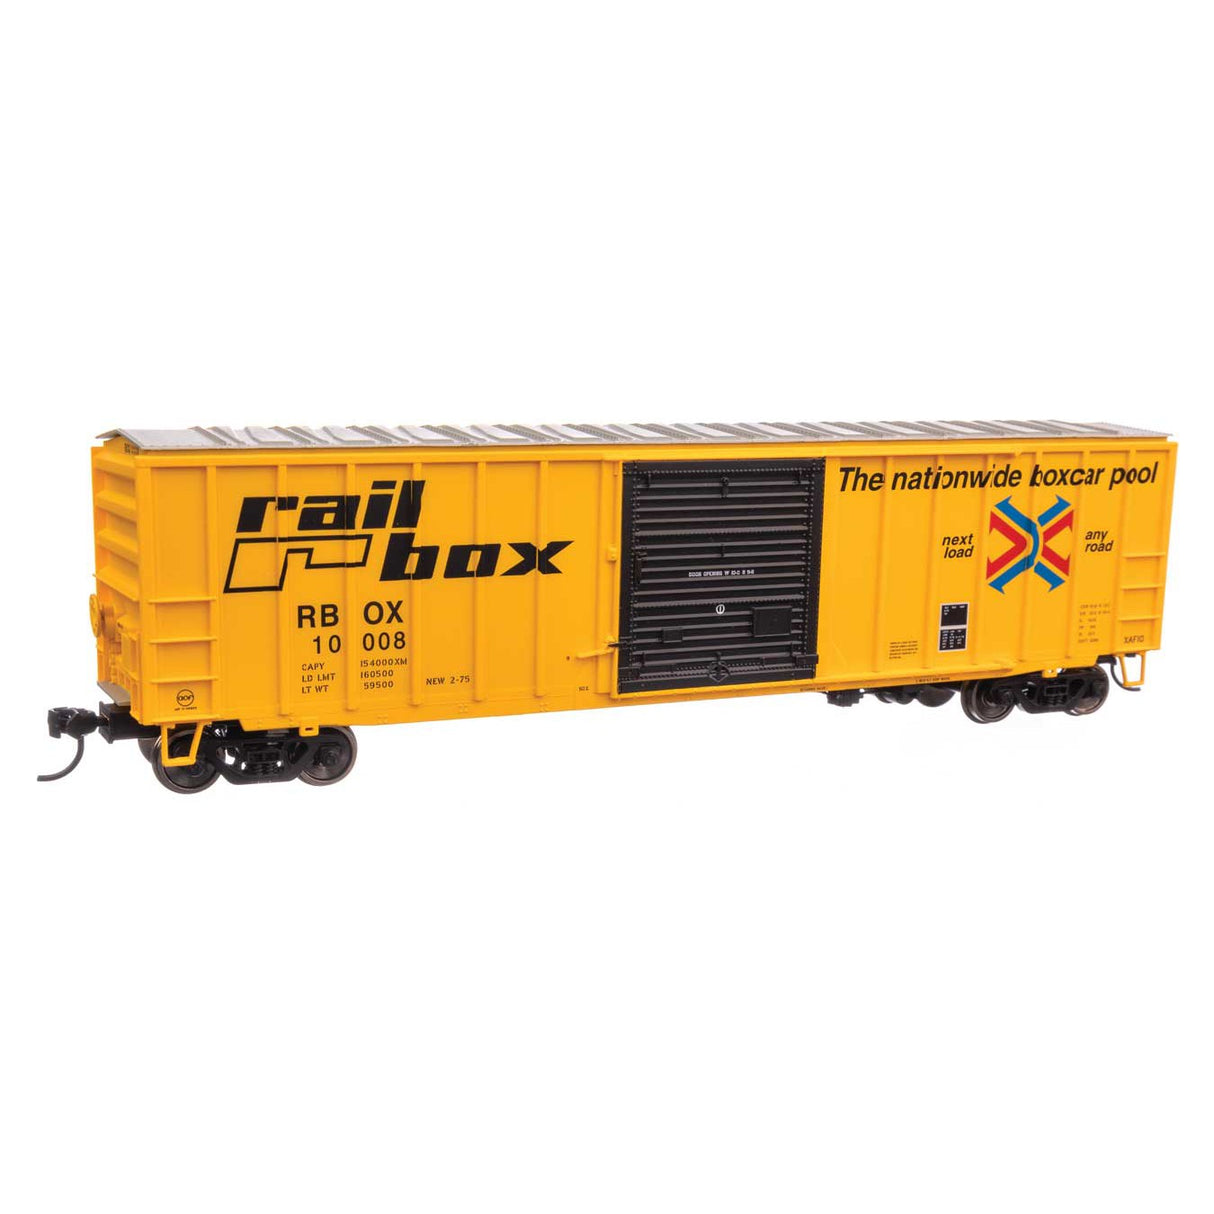 Walthers Mainline HO Scale Railbox RBOX #10008 50' ACF Exterior Post Boxcar